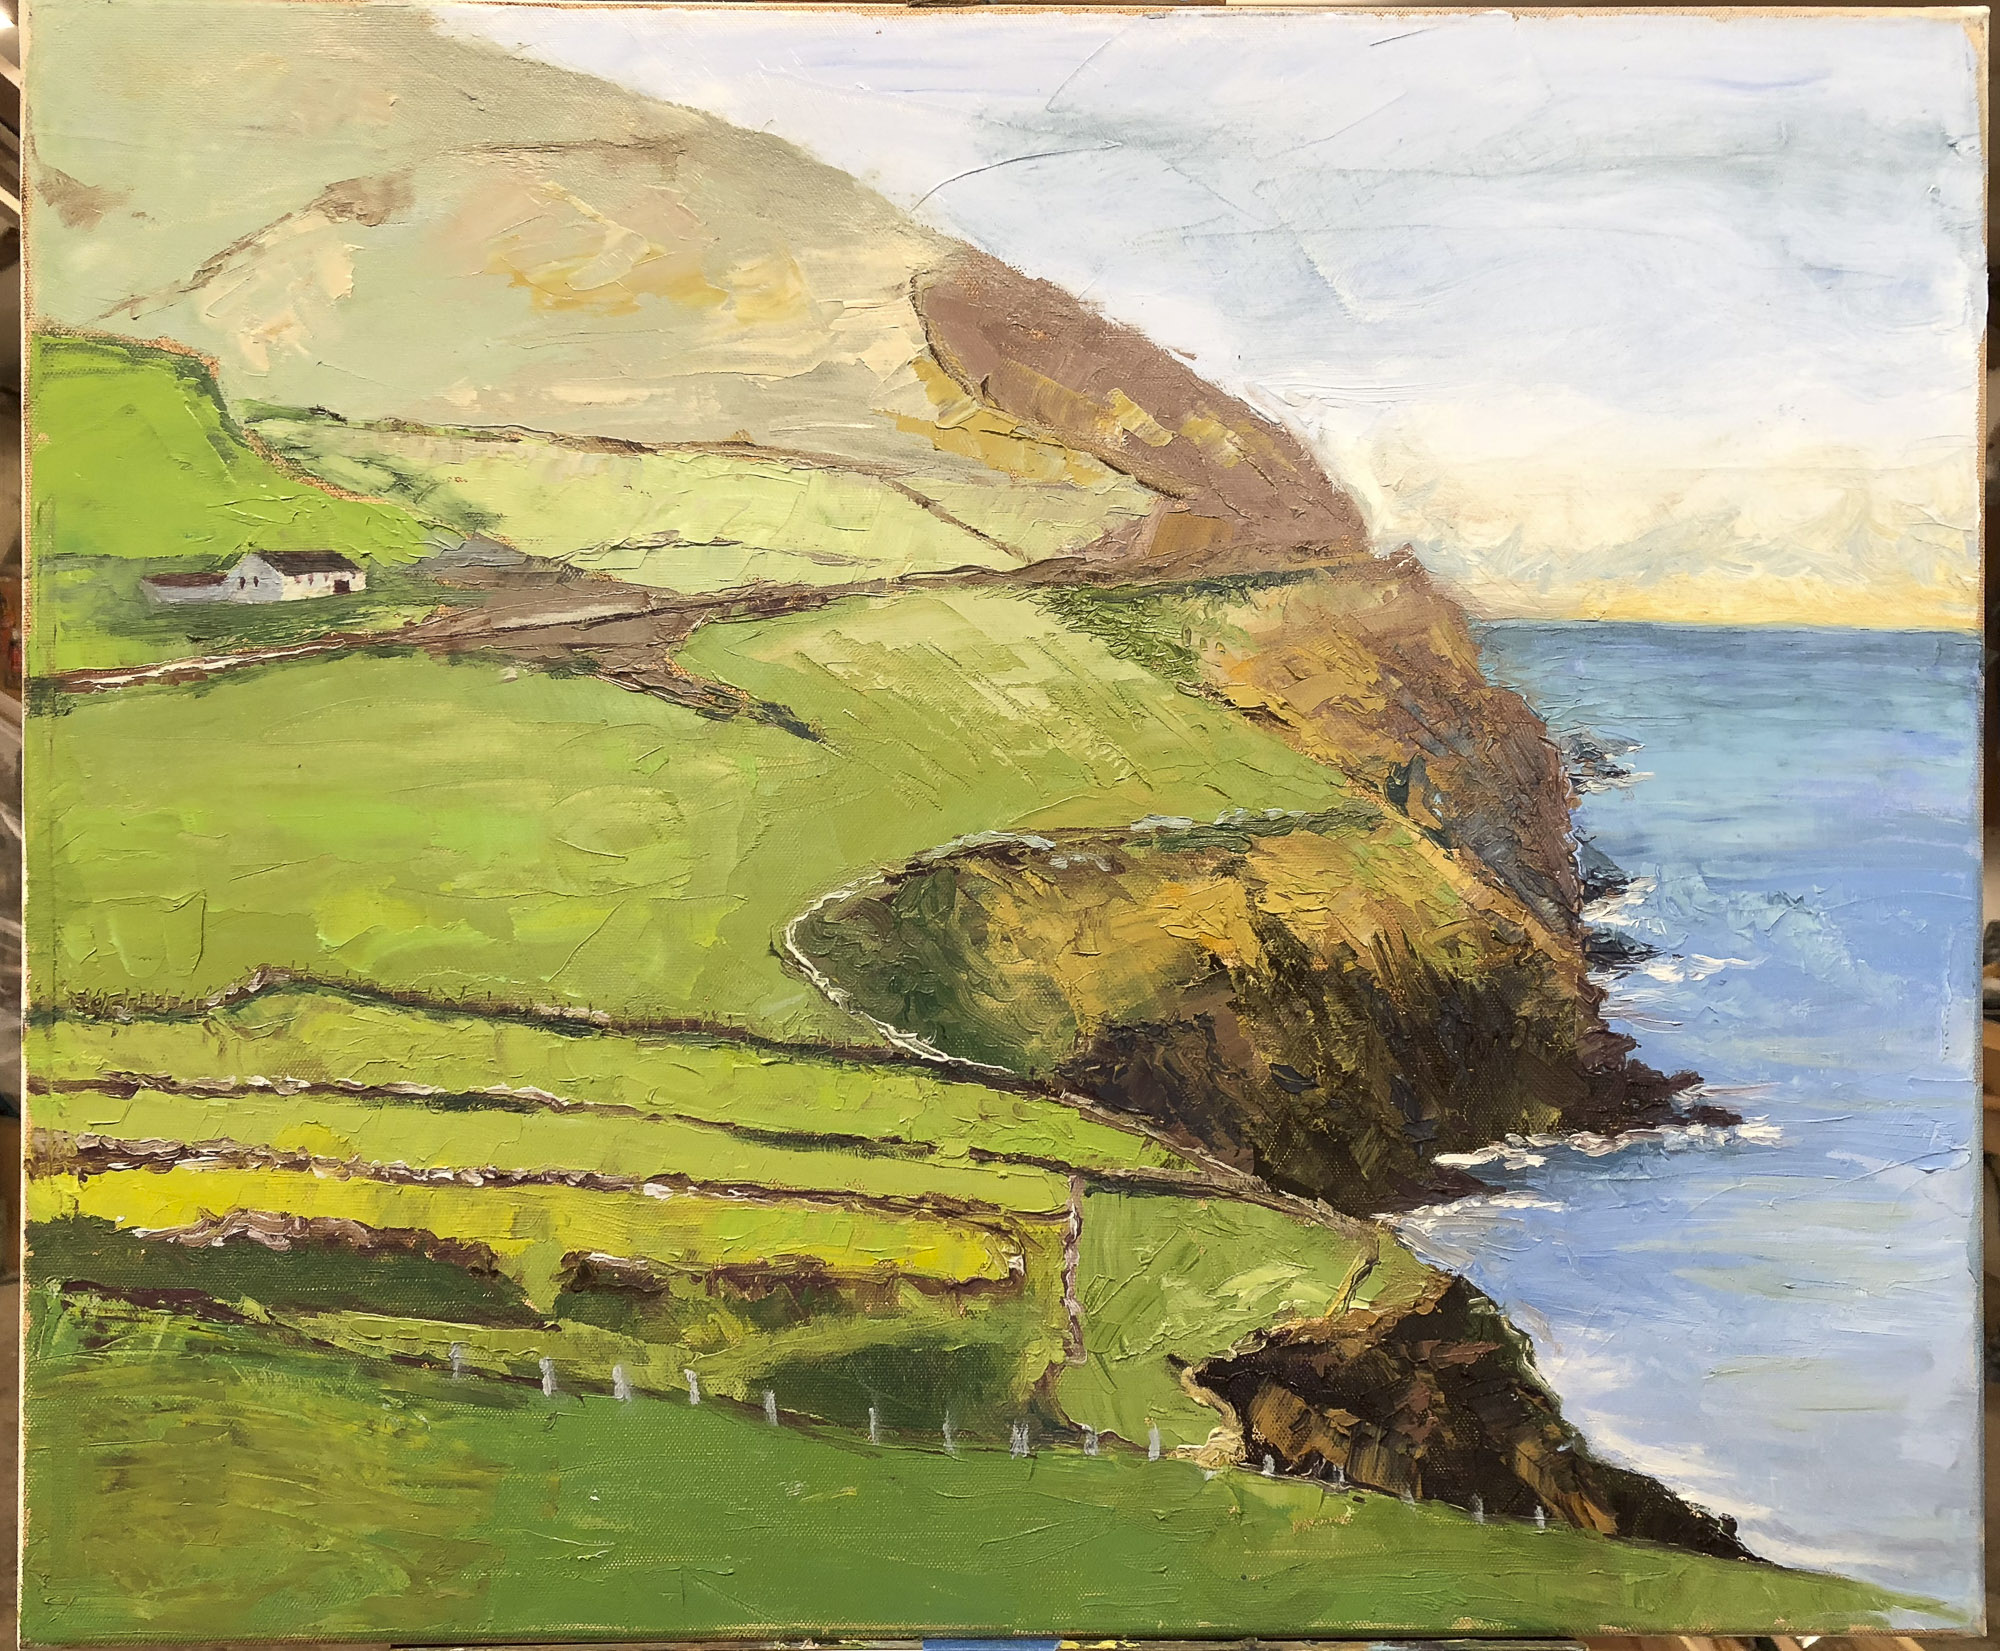 Oil painting of the west coast of Ireland